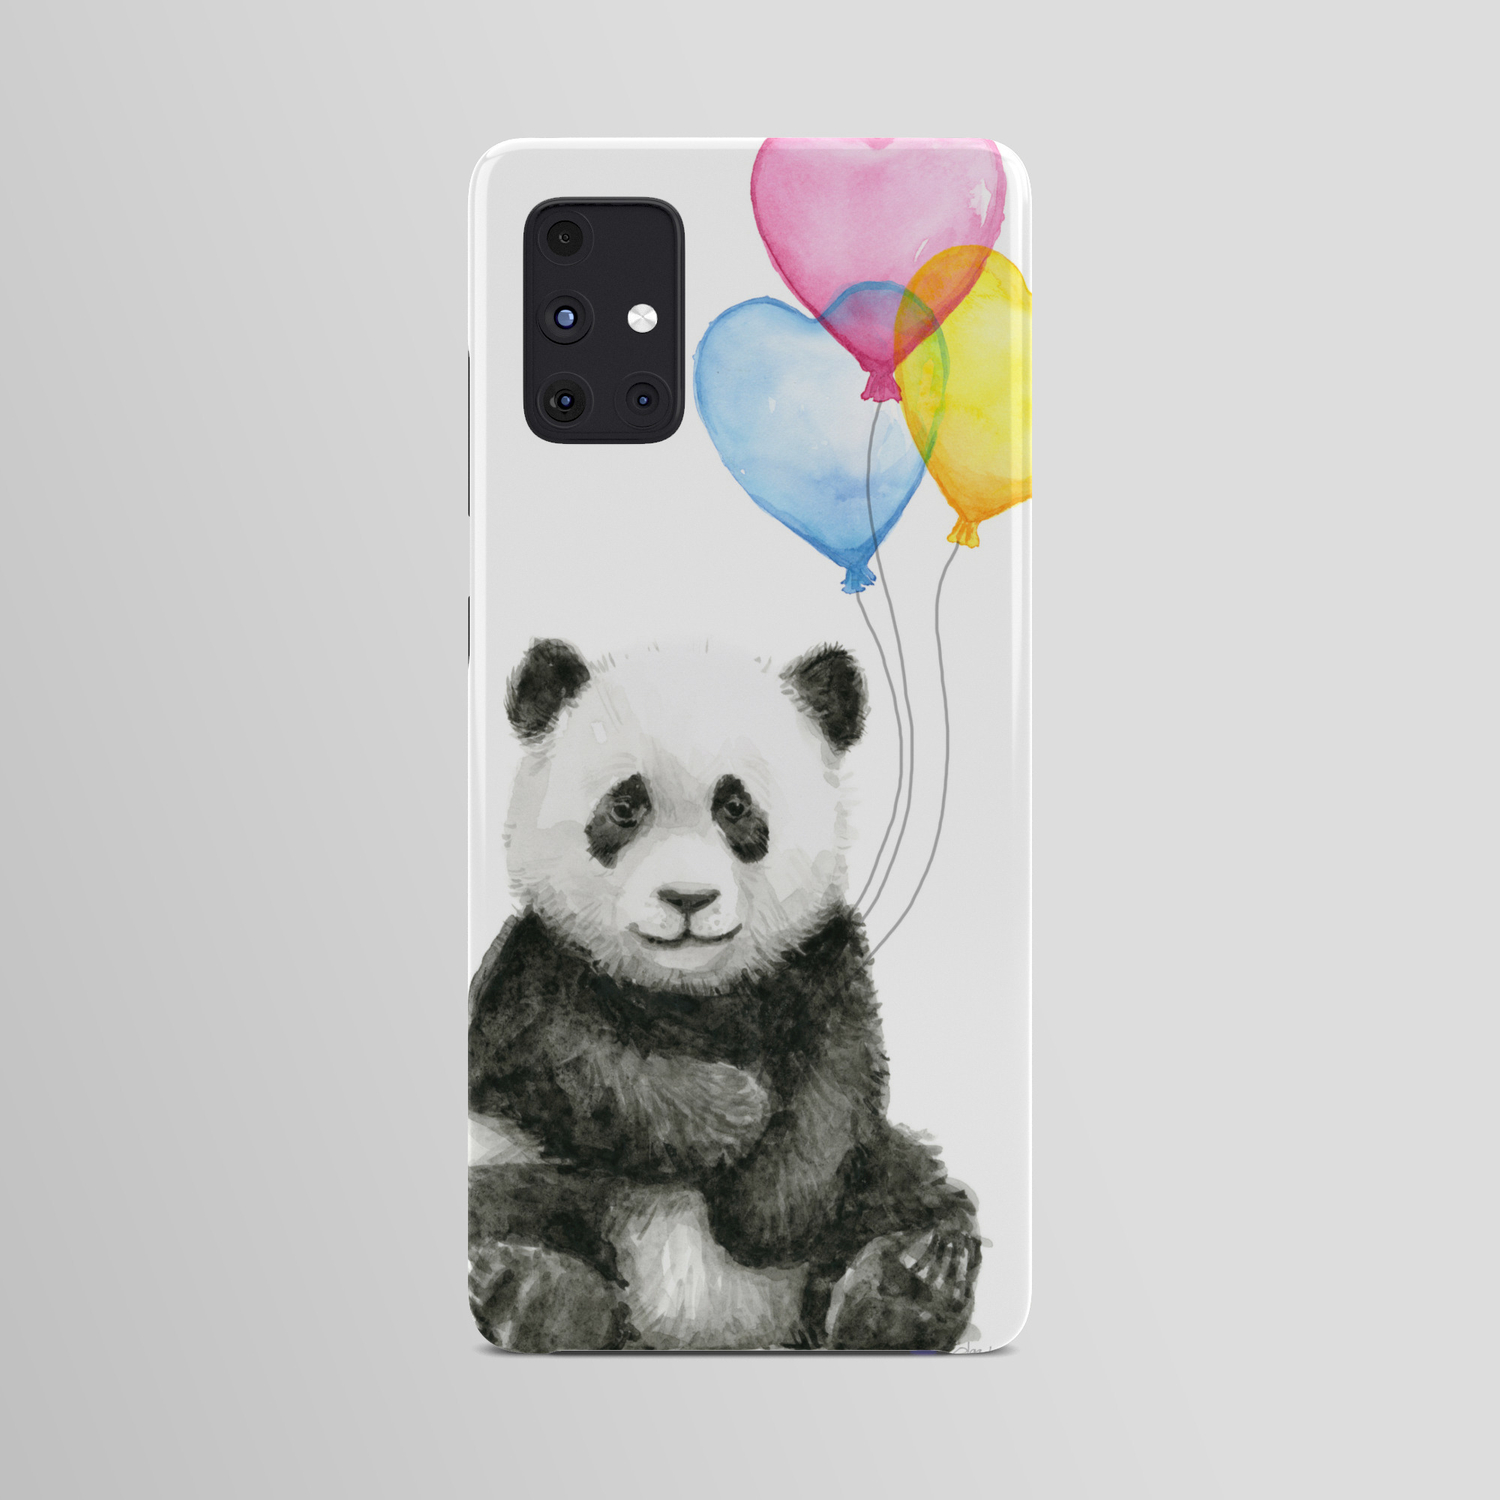 Panda Baby with Heart-Shaped Balloons Whimsical Animals Nursery Decor  Android Case by Olechka | Society6